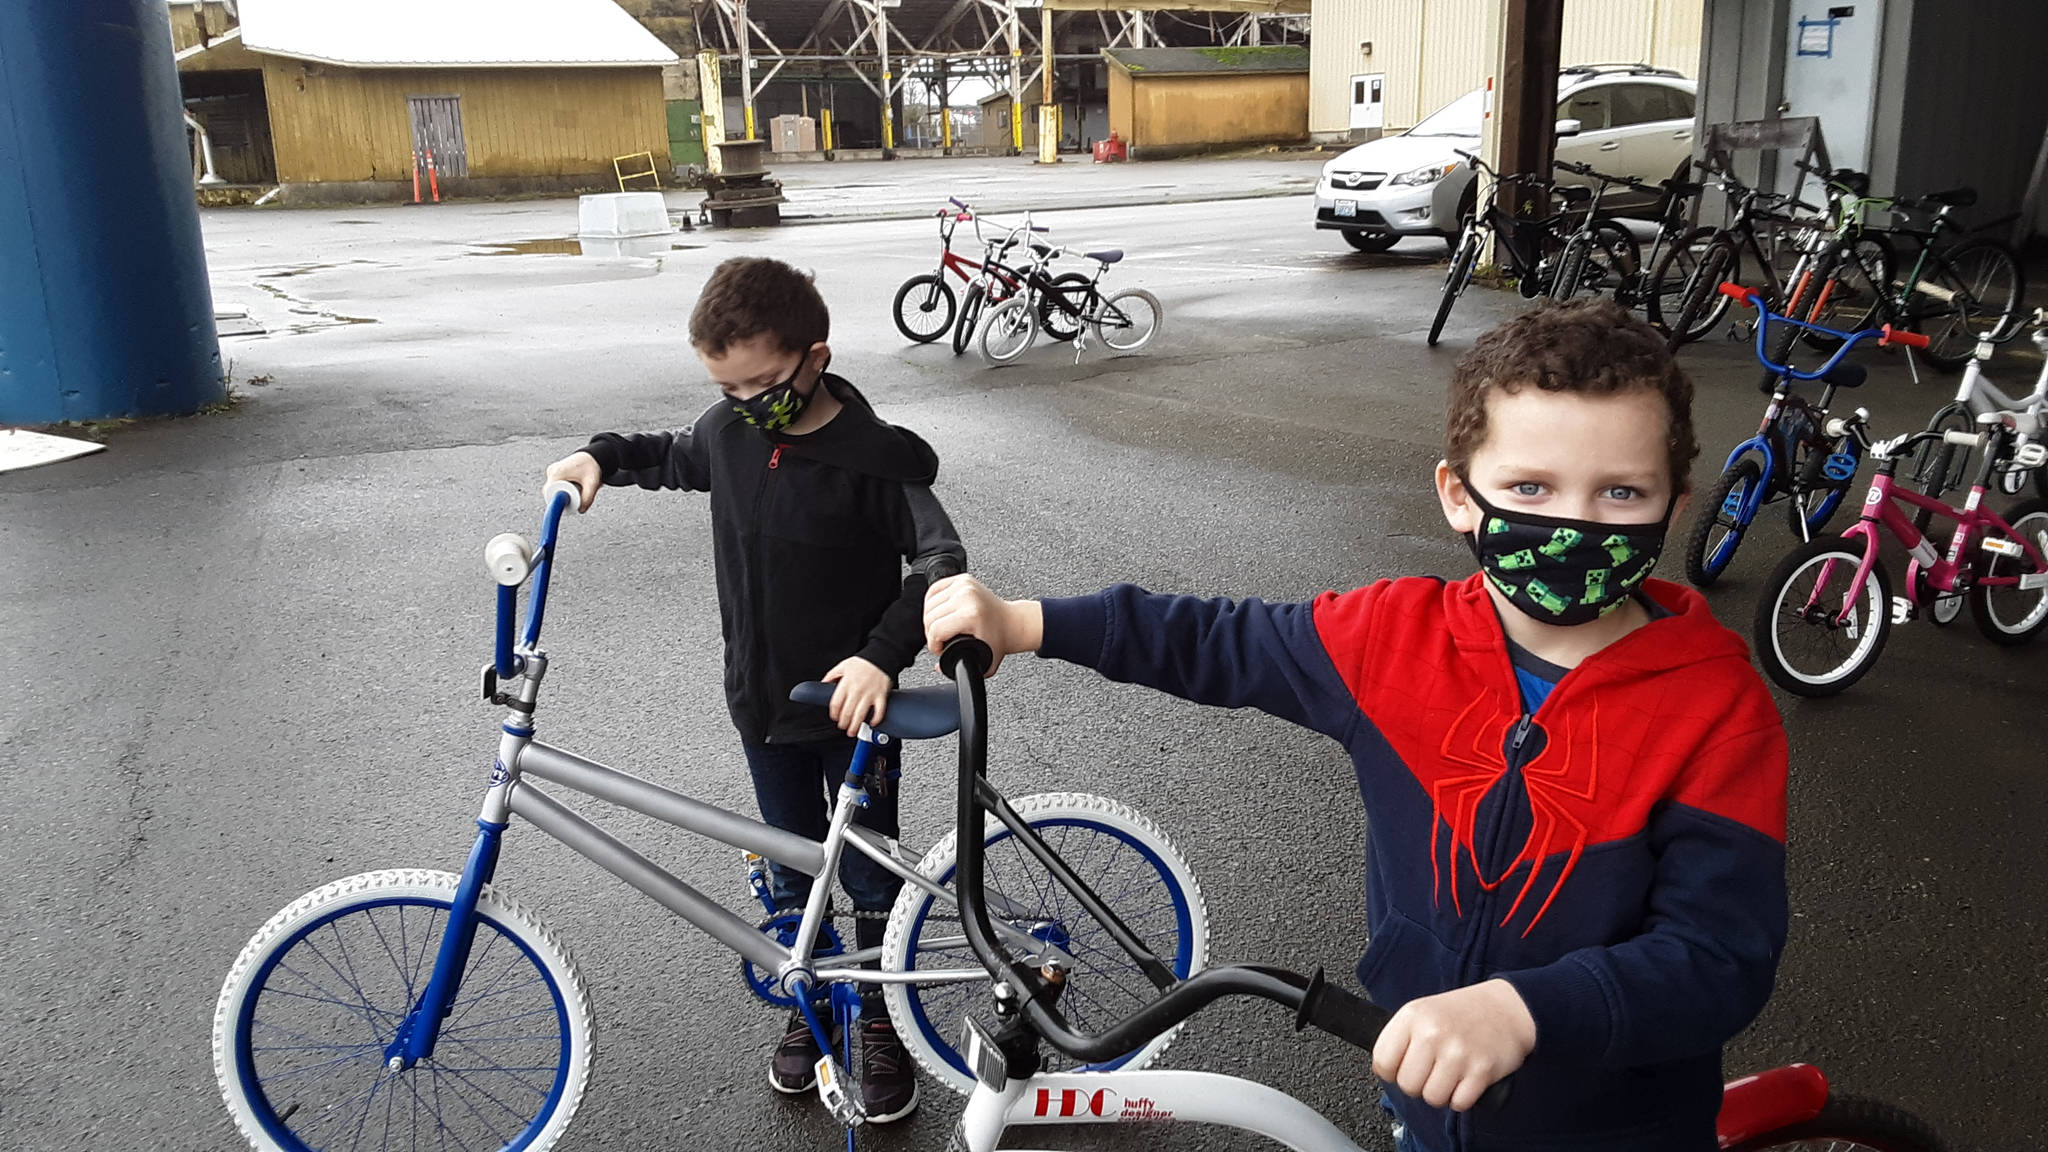 Conner and Troy, both 7-years-old, are now ready to roll into the new year.